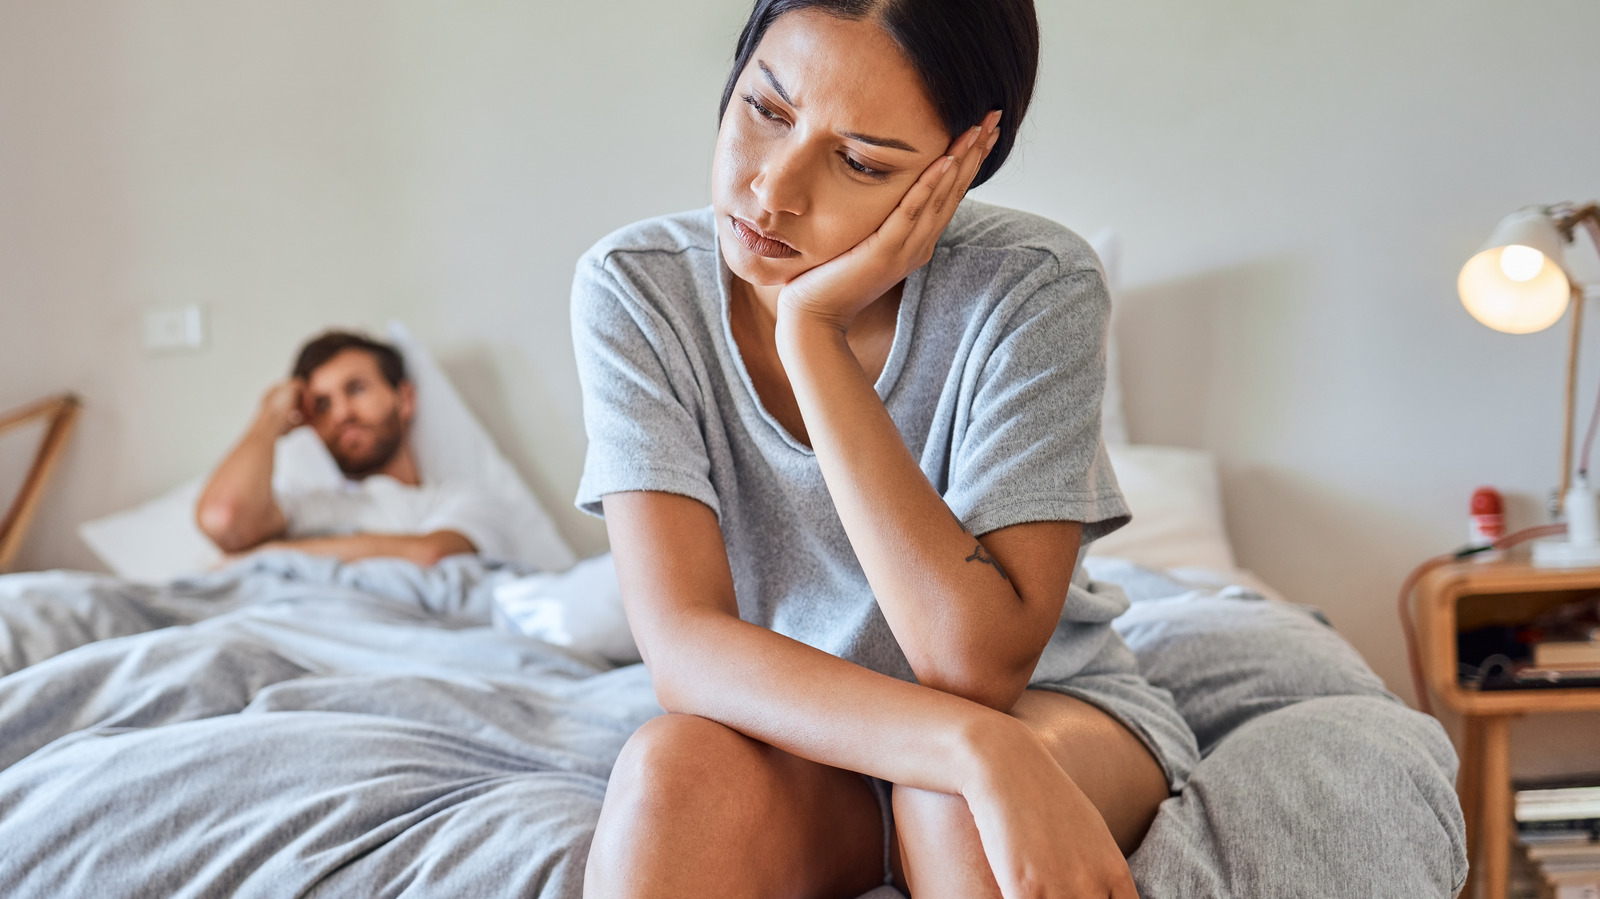 When You Stop Having Sex, This Is What Happens To Your Early Death Risk - Health Digest